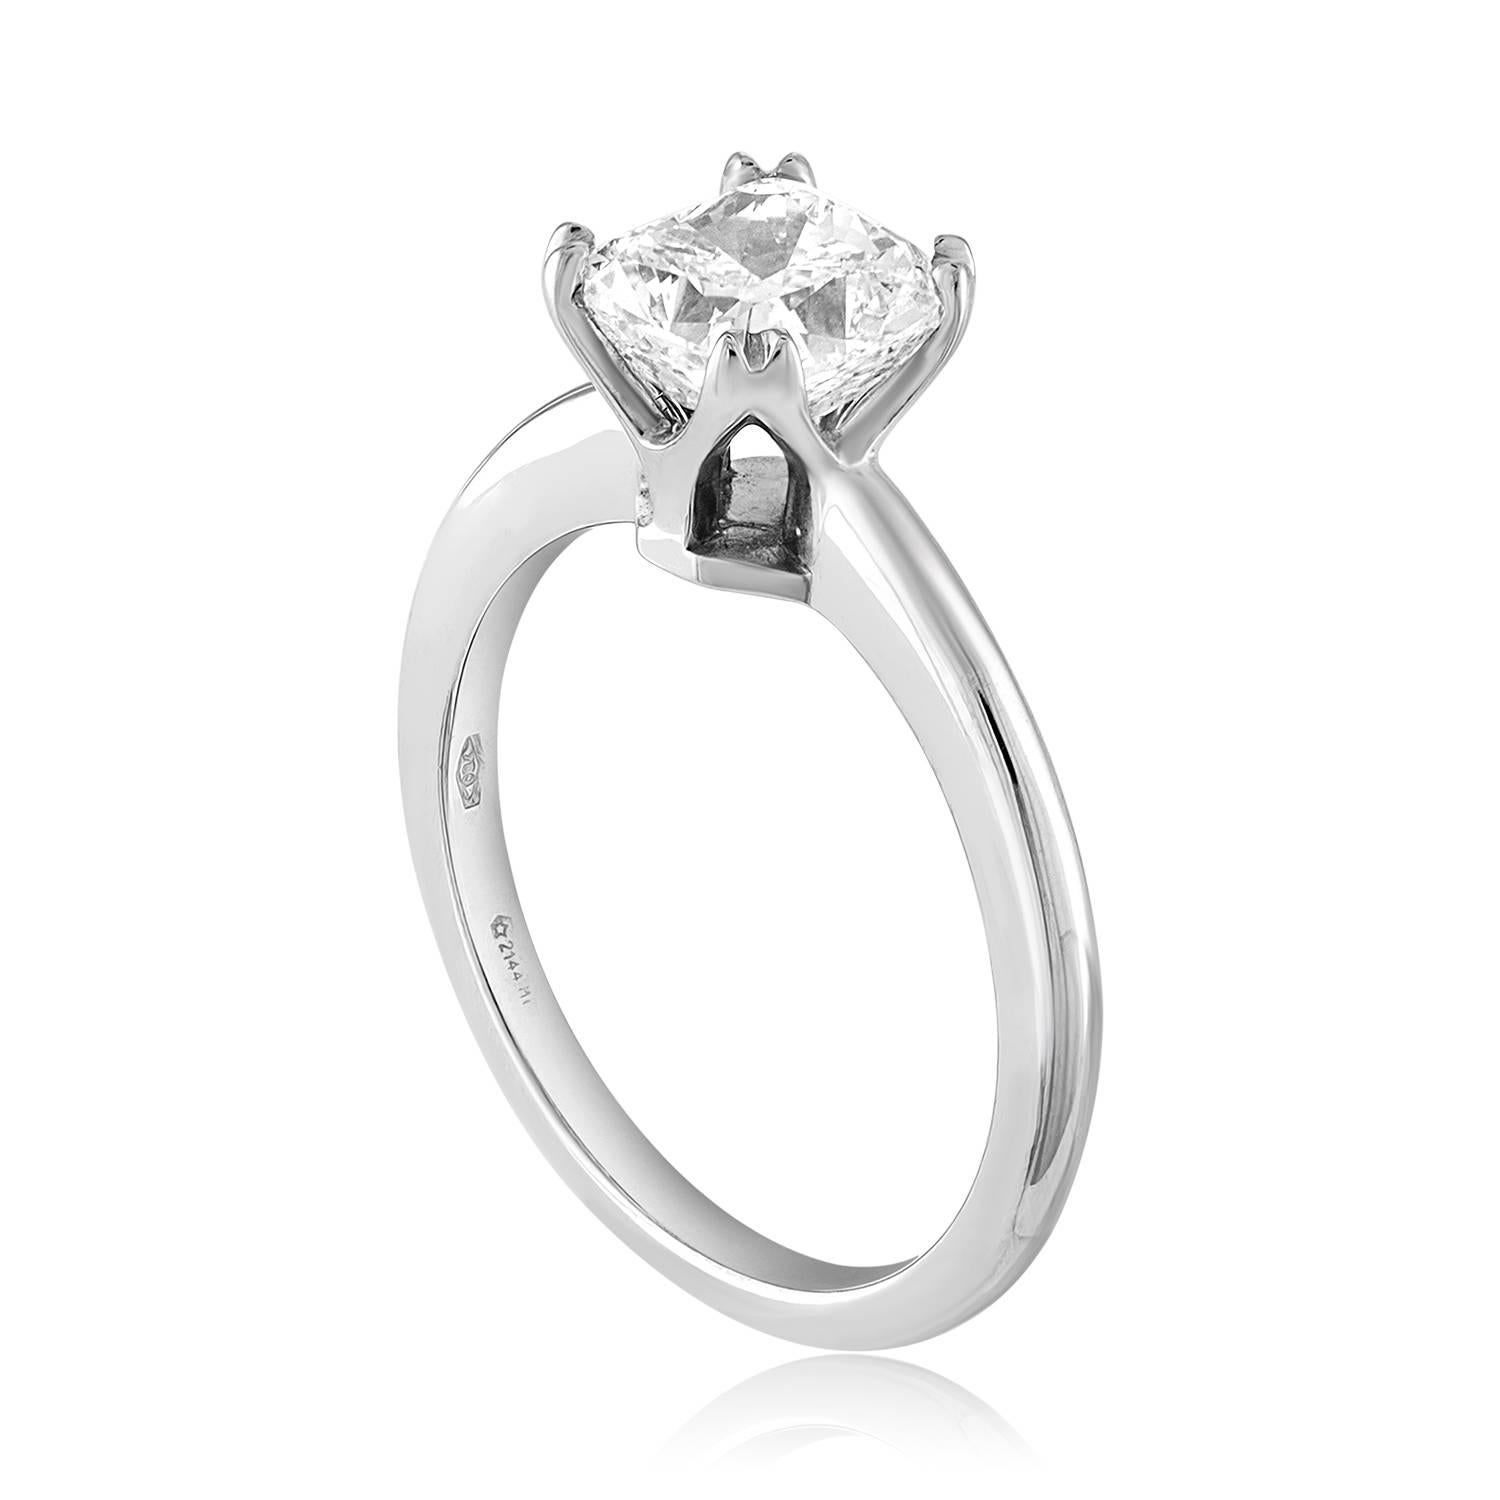 Solitaire Engagement Ring
The ring is 18K White Gold
The center Is Cushion Cut Stone, GIA Certified 1.70Ct G VS1
The ring is a size 6.5, sizable.
The ring weighs 3.9 grams